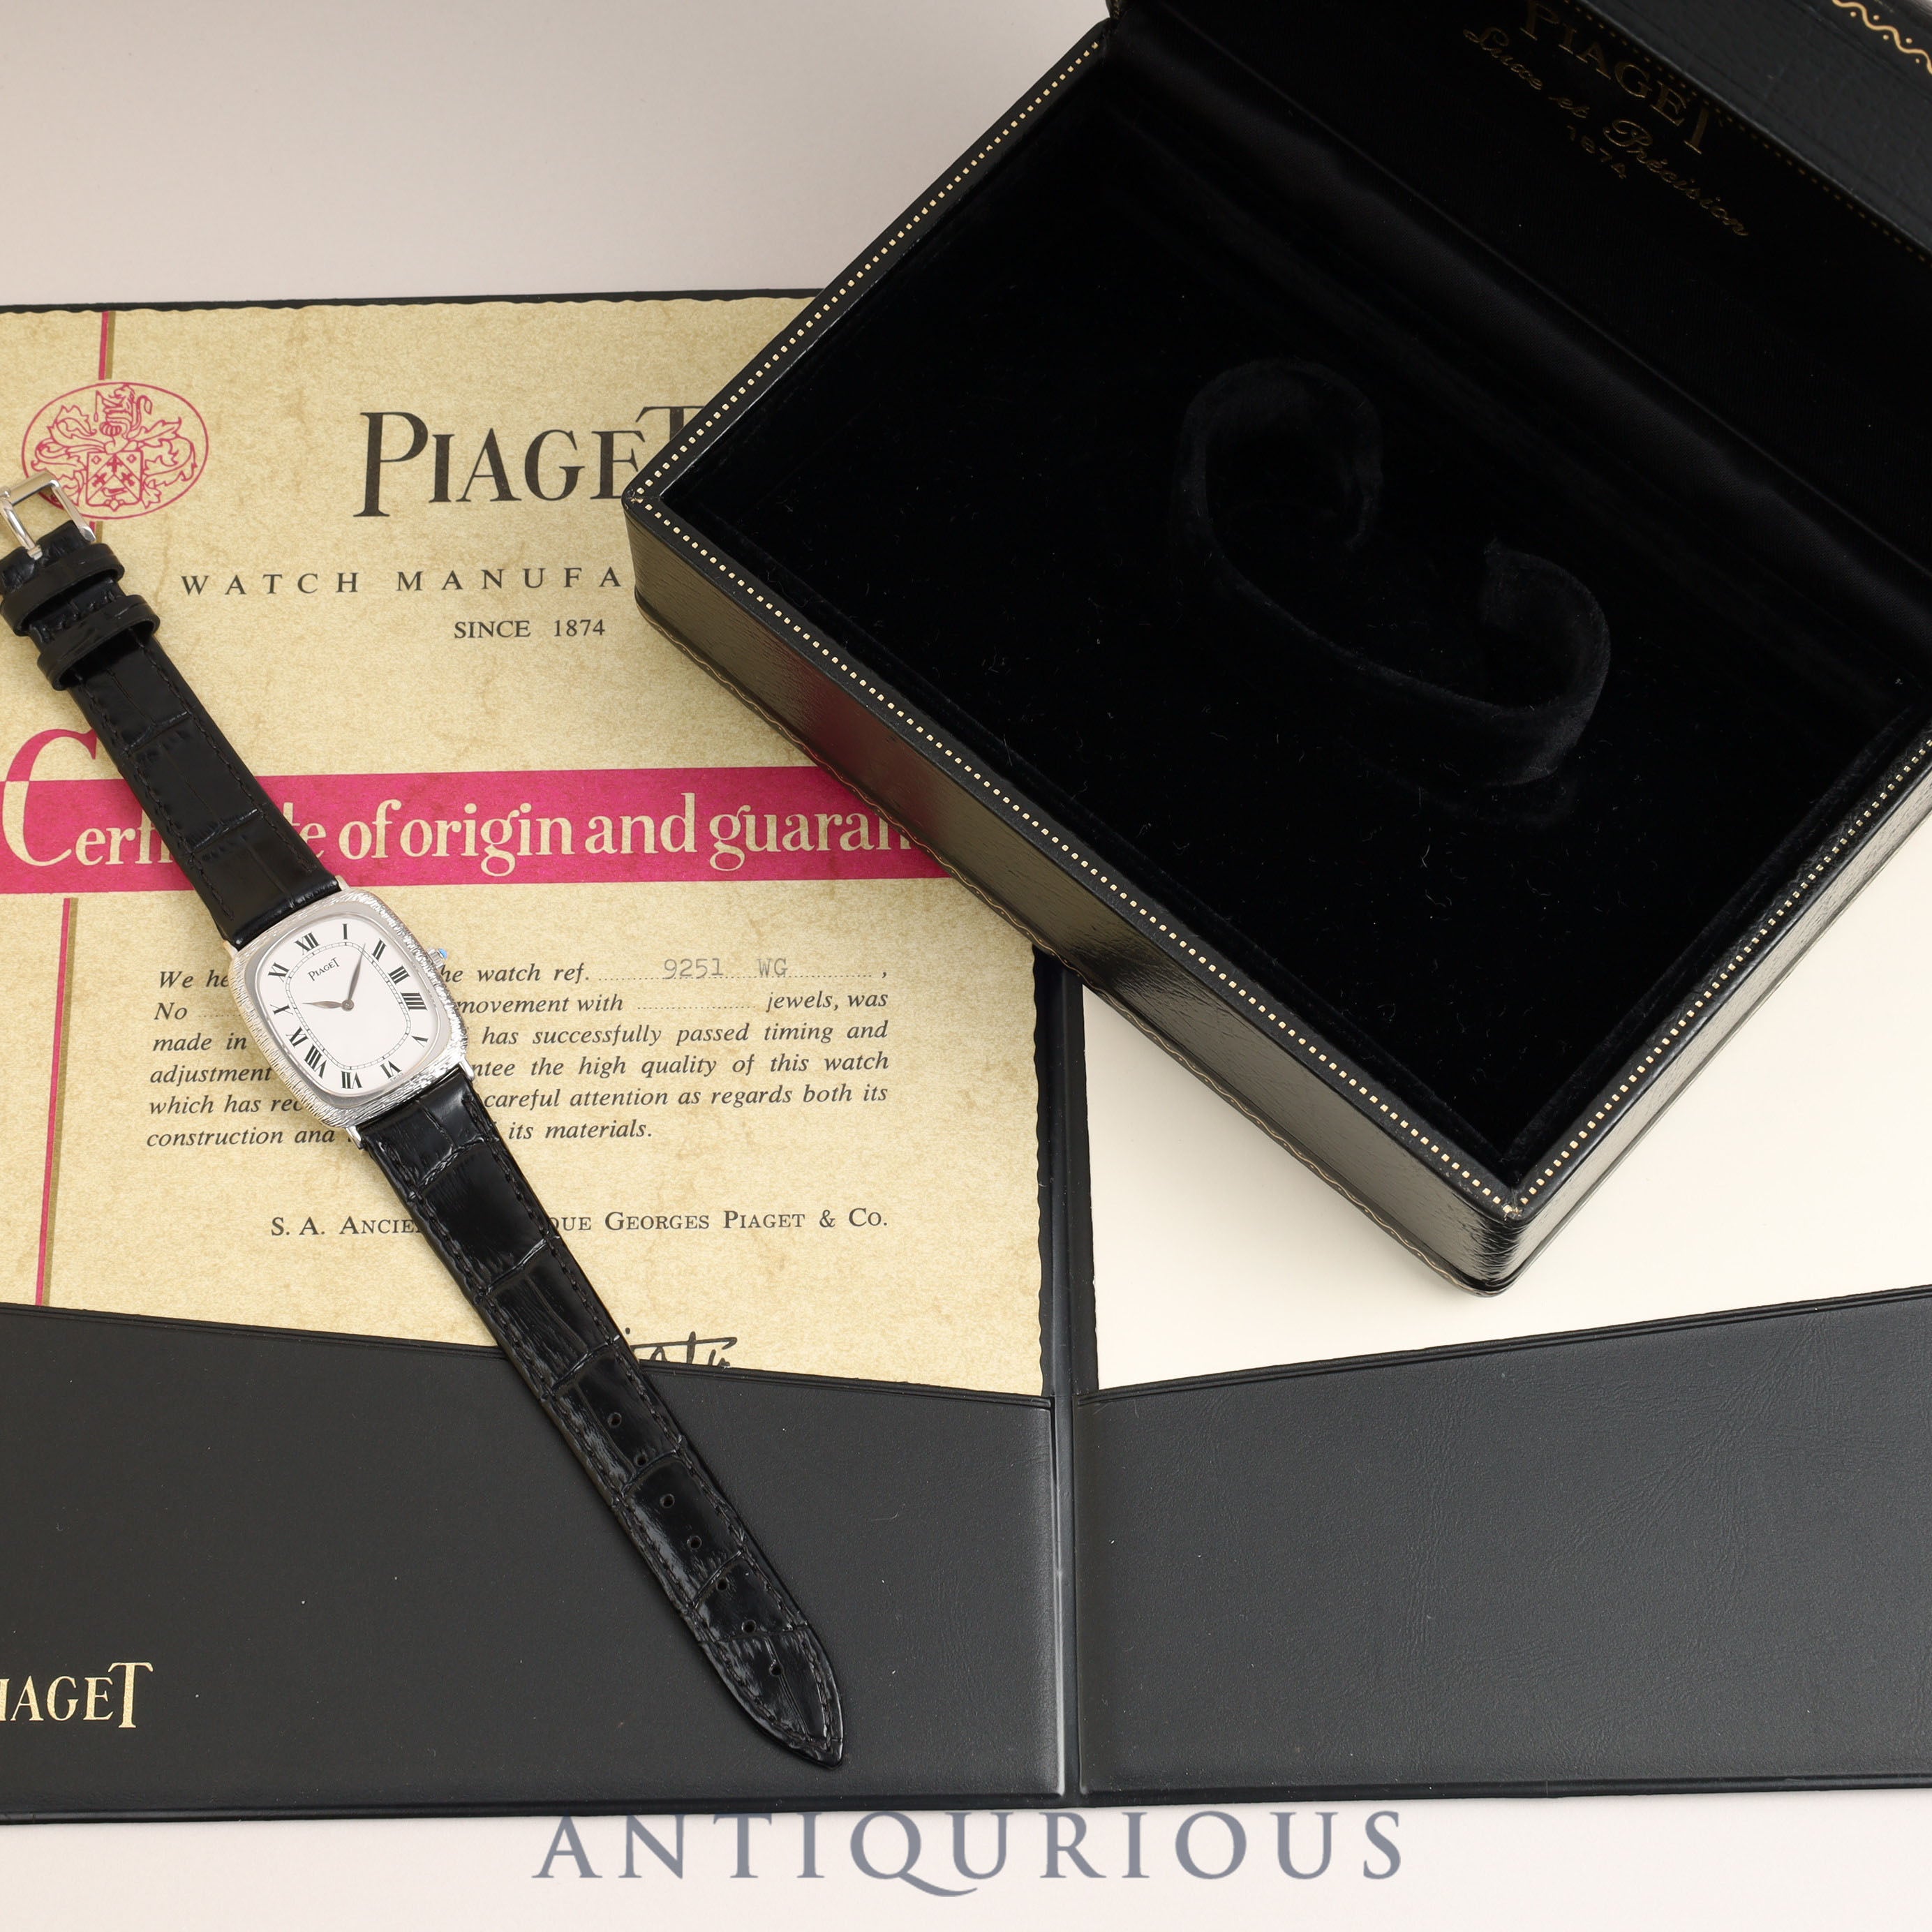 PIAGET RECTANGULAR CASE 9251 Box with warranty card